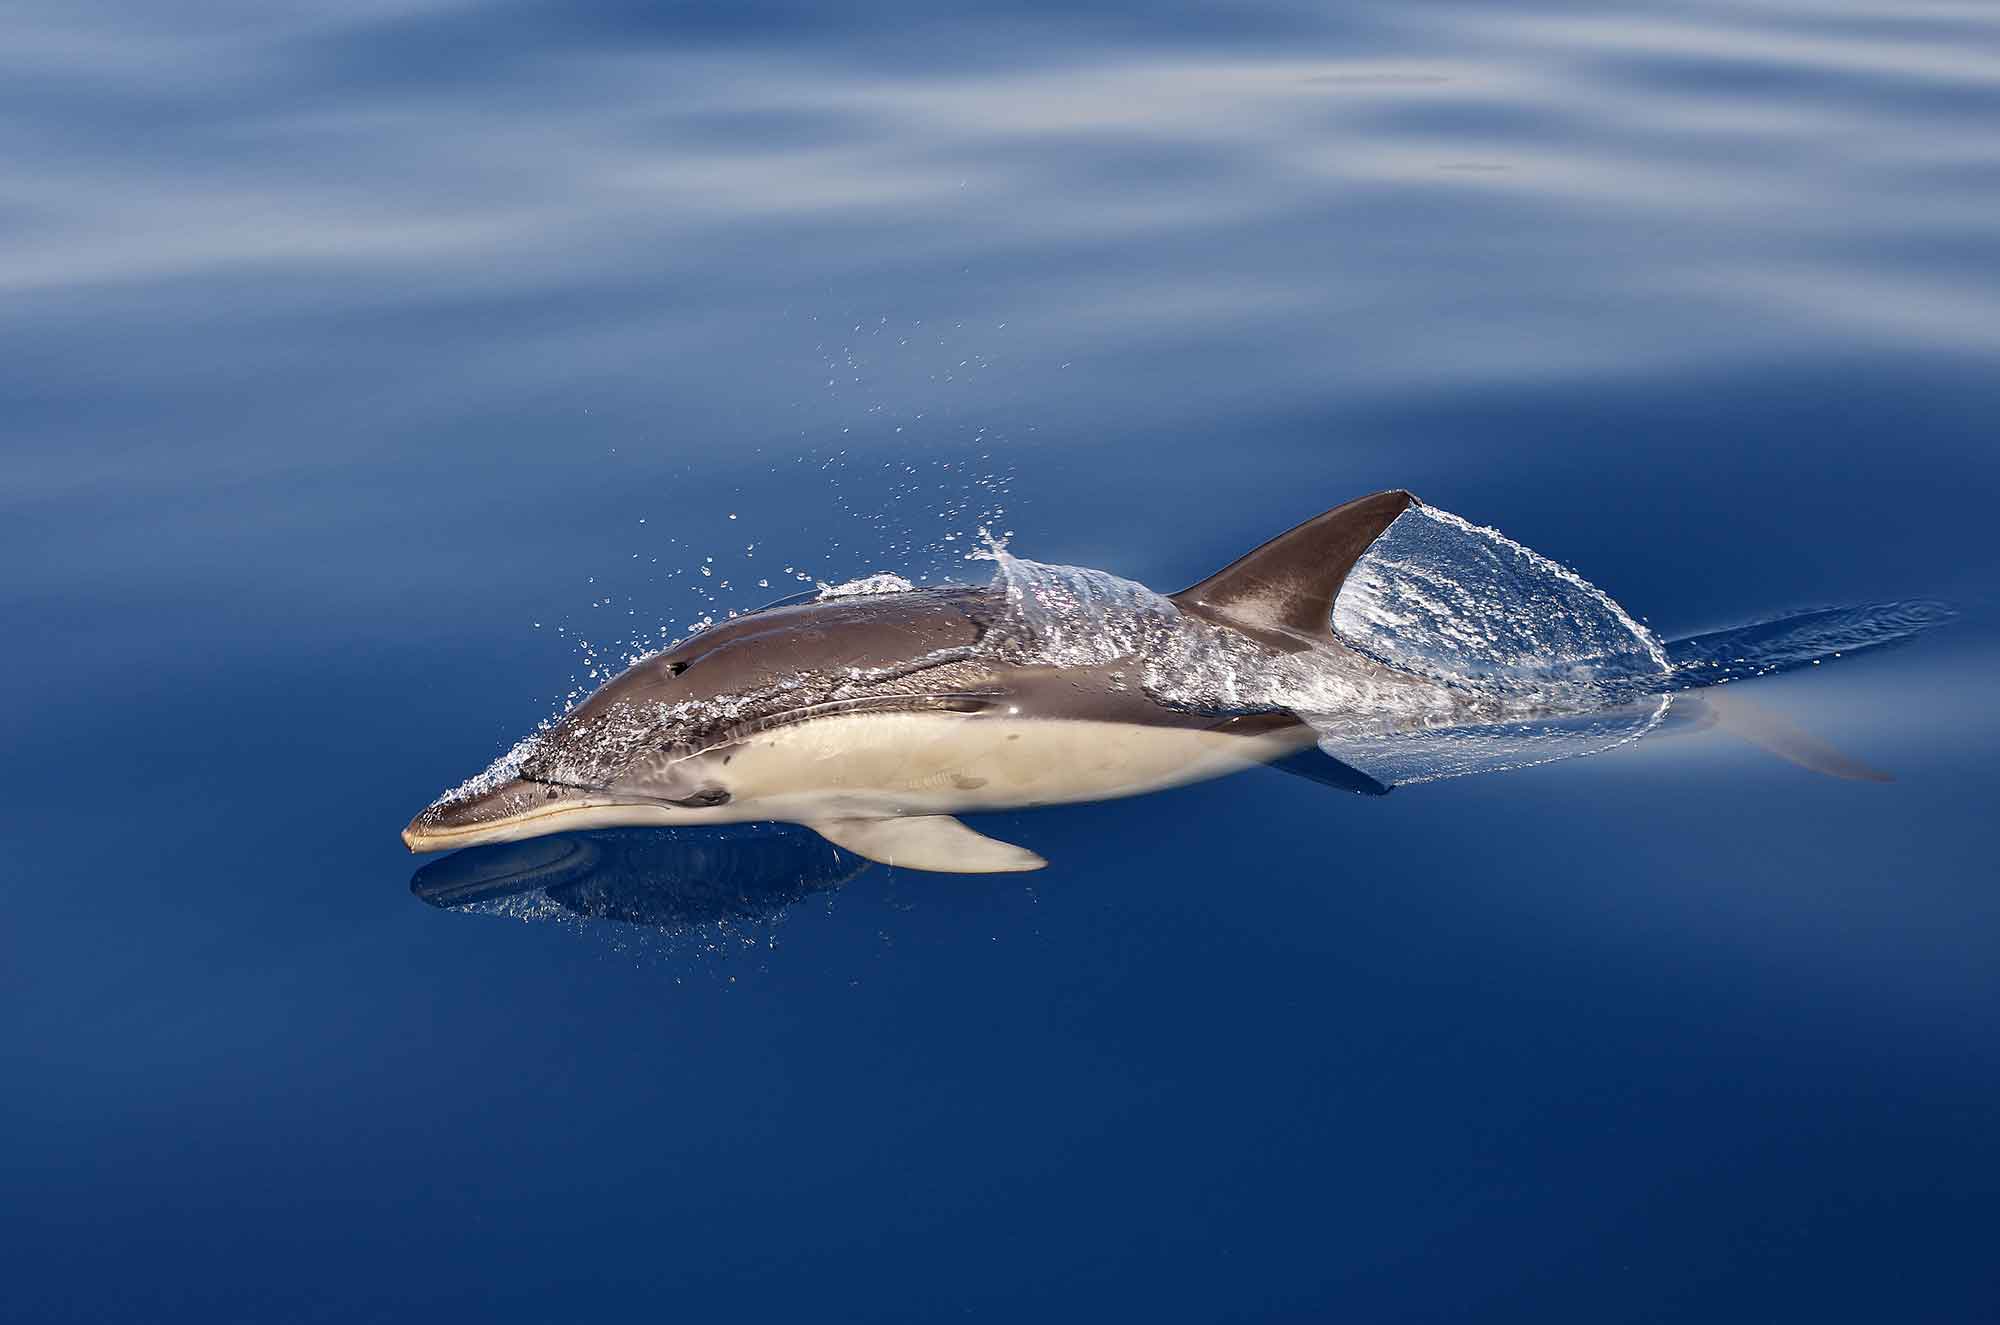 The Long Beaked Common dolphin is one of the most often observed cetacean species on San Diego whale watching tours.